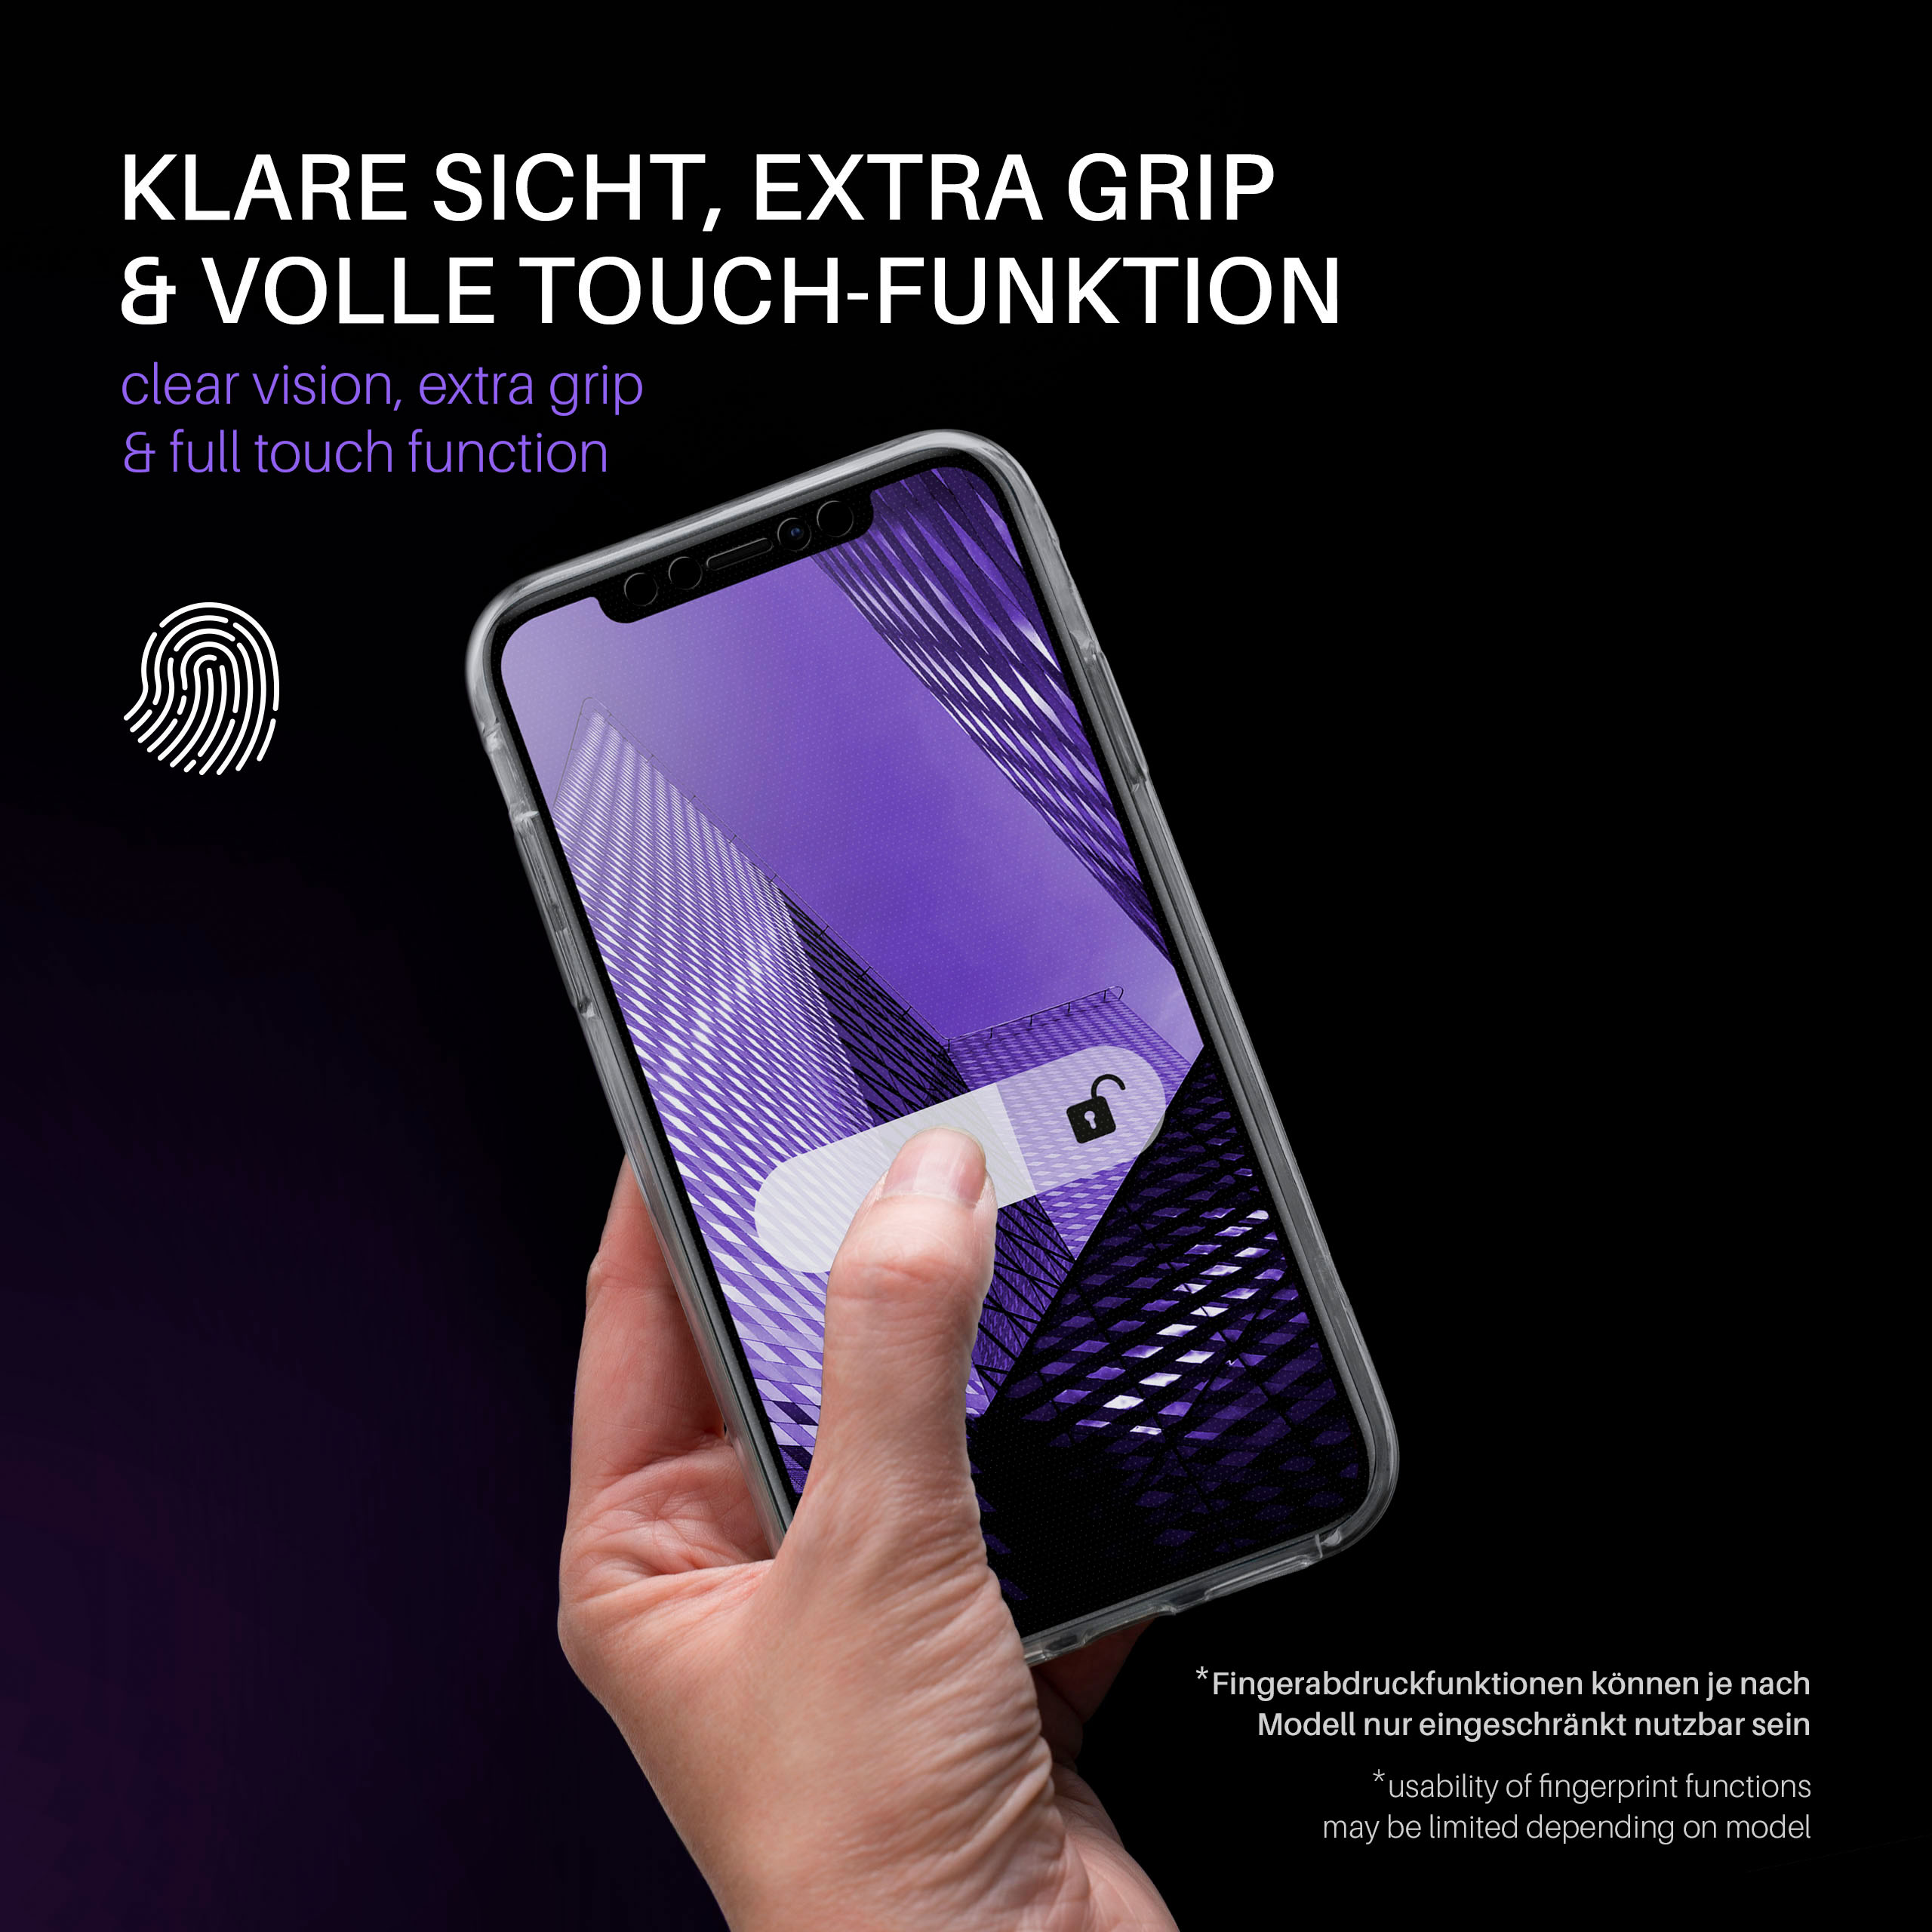 S5 Case, Anthracite Galaxy Neo, Samsung, Full / S5 MOEX Cover, Double